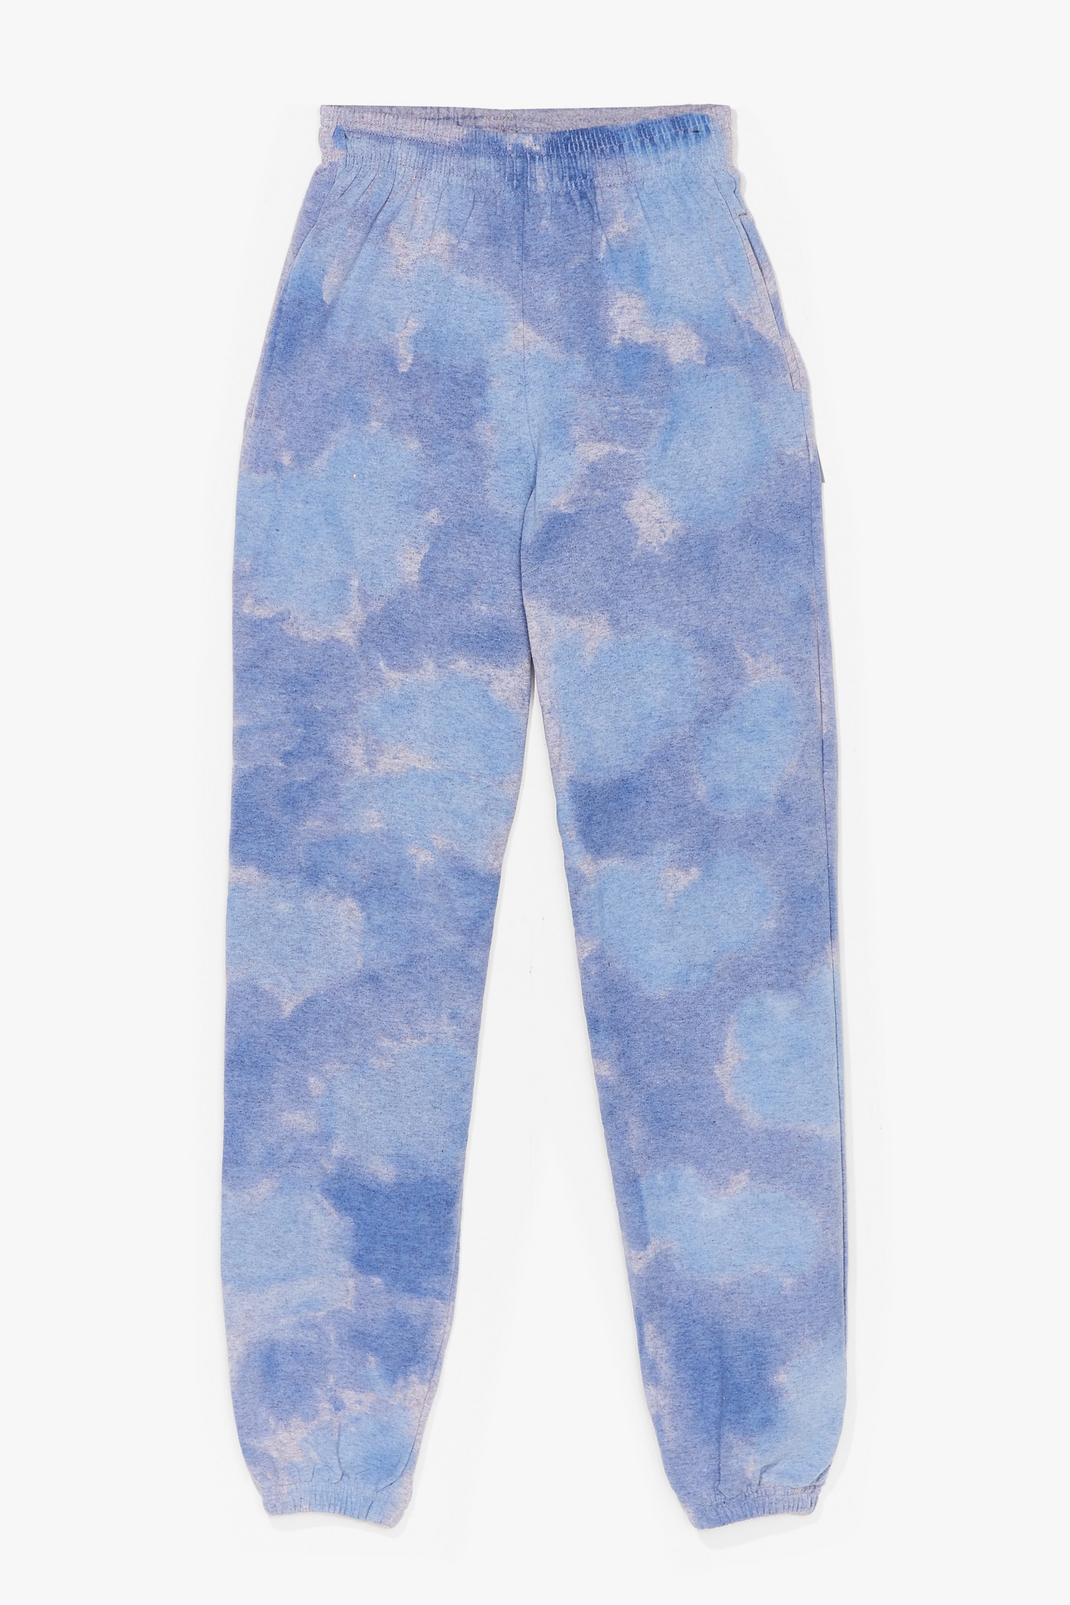 Blue Tie Dye Slouchy High Waisted Joggers image number 1